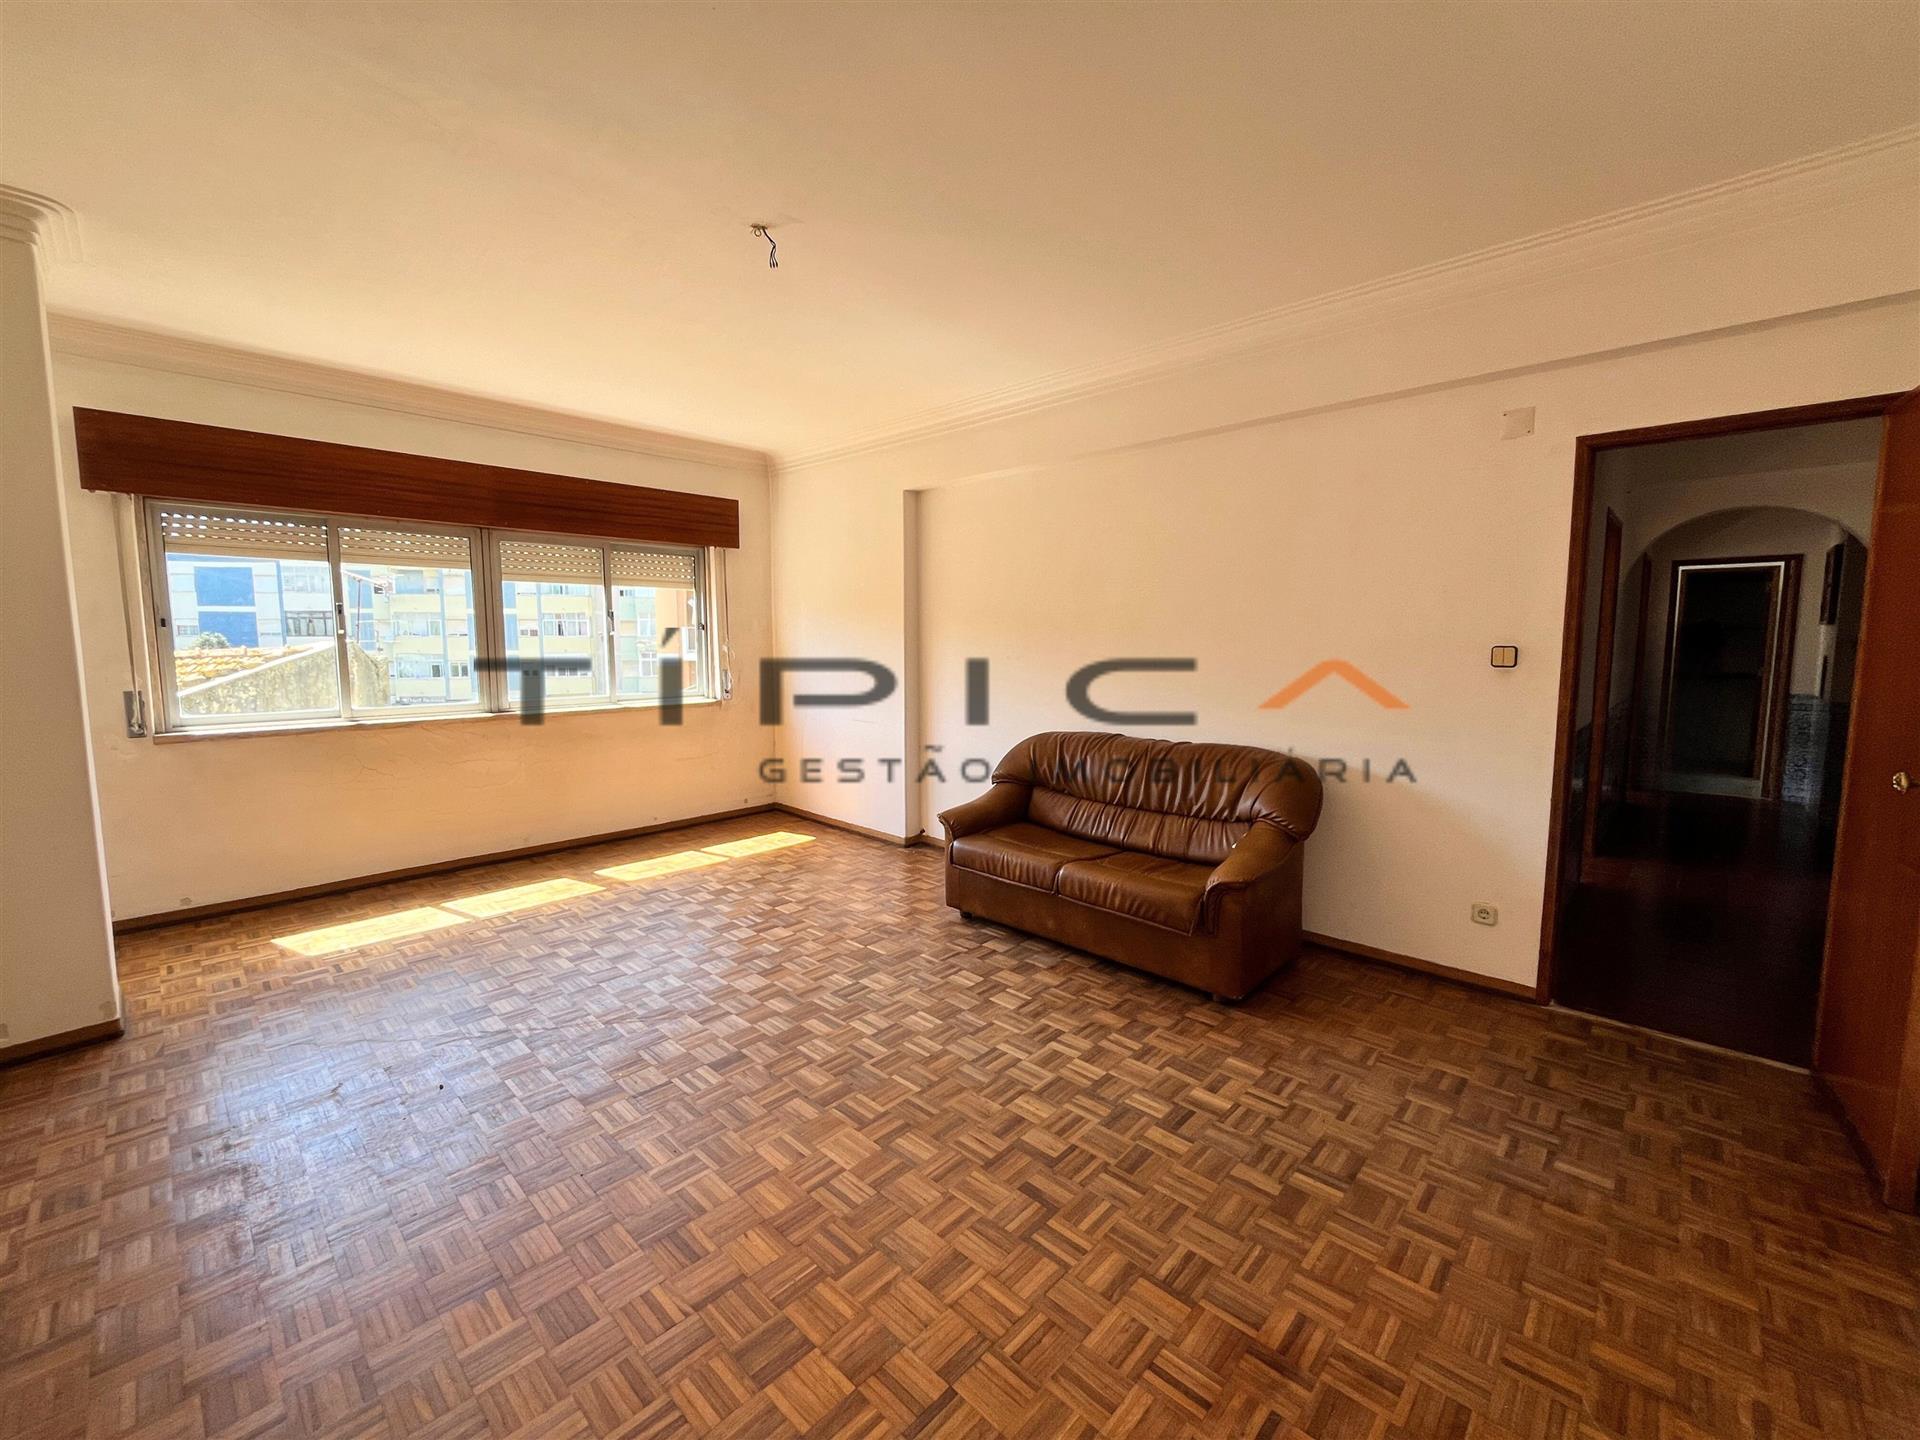 2 bedroom apartment in quiet square: Ideal for housing or investment